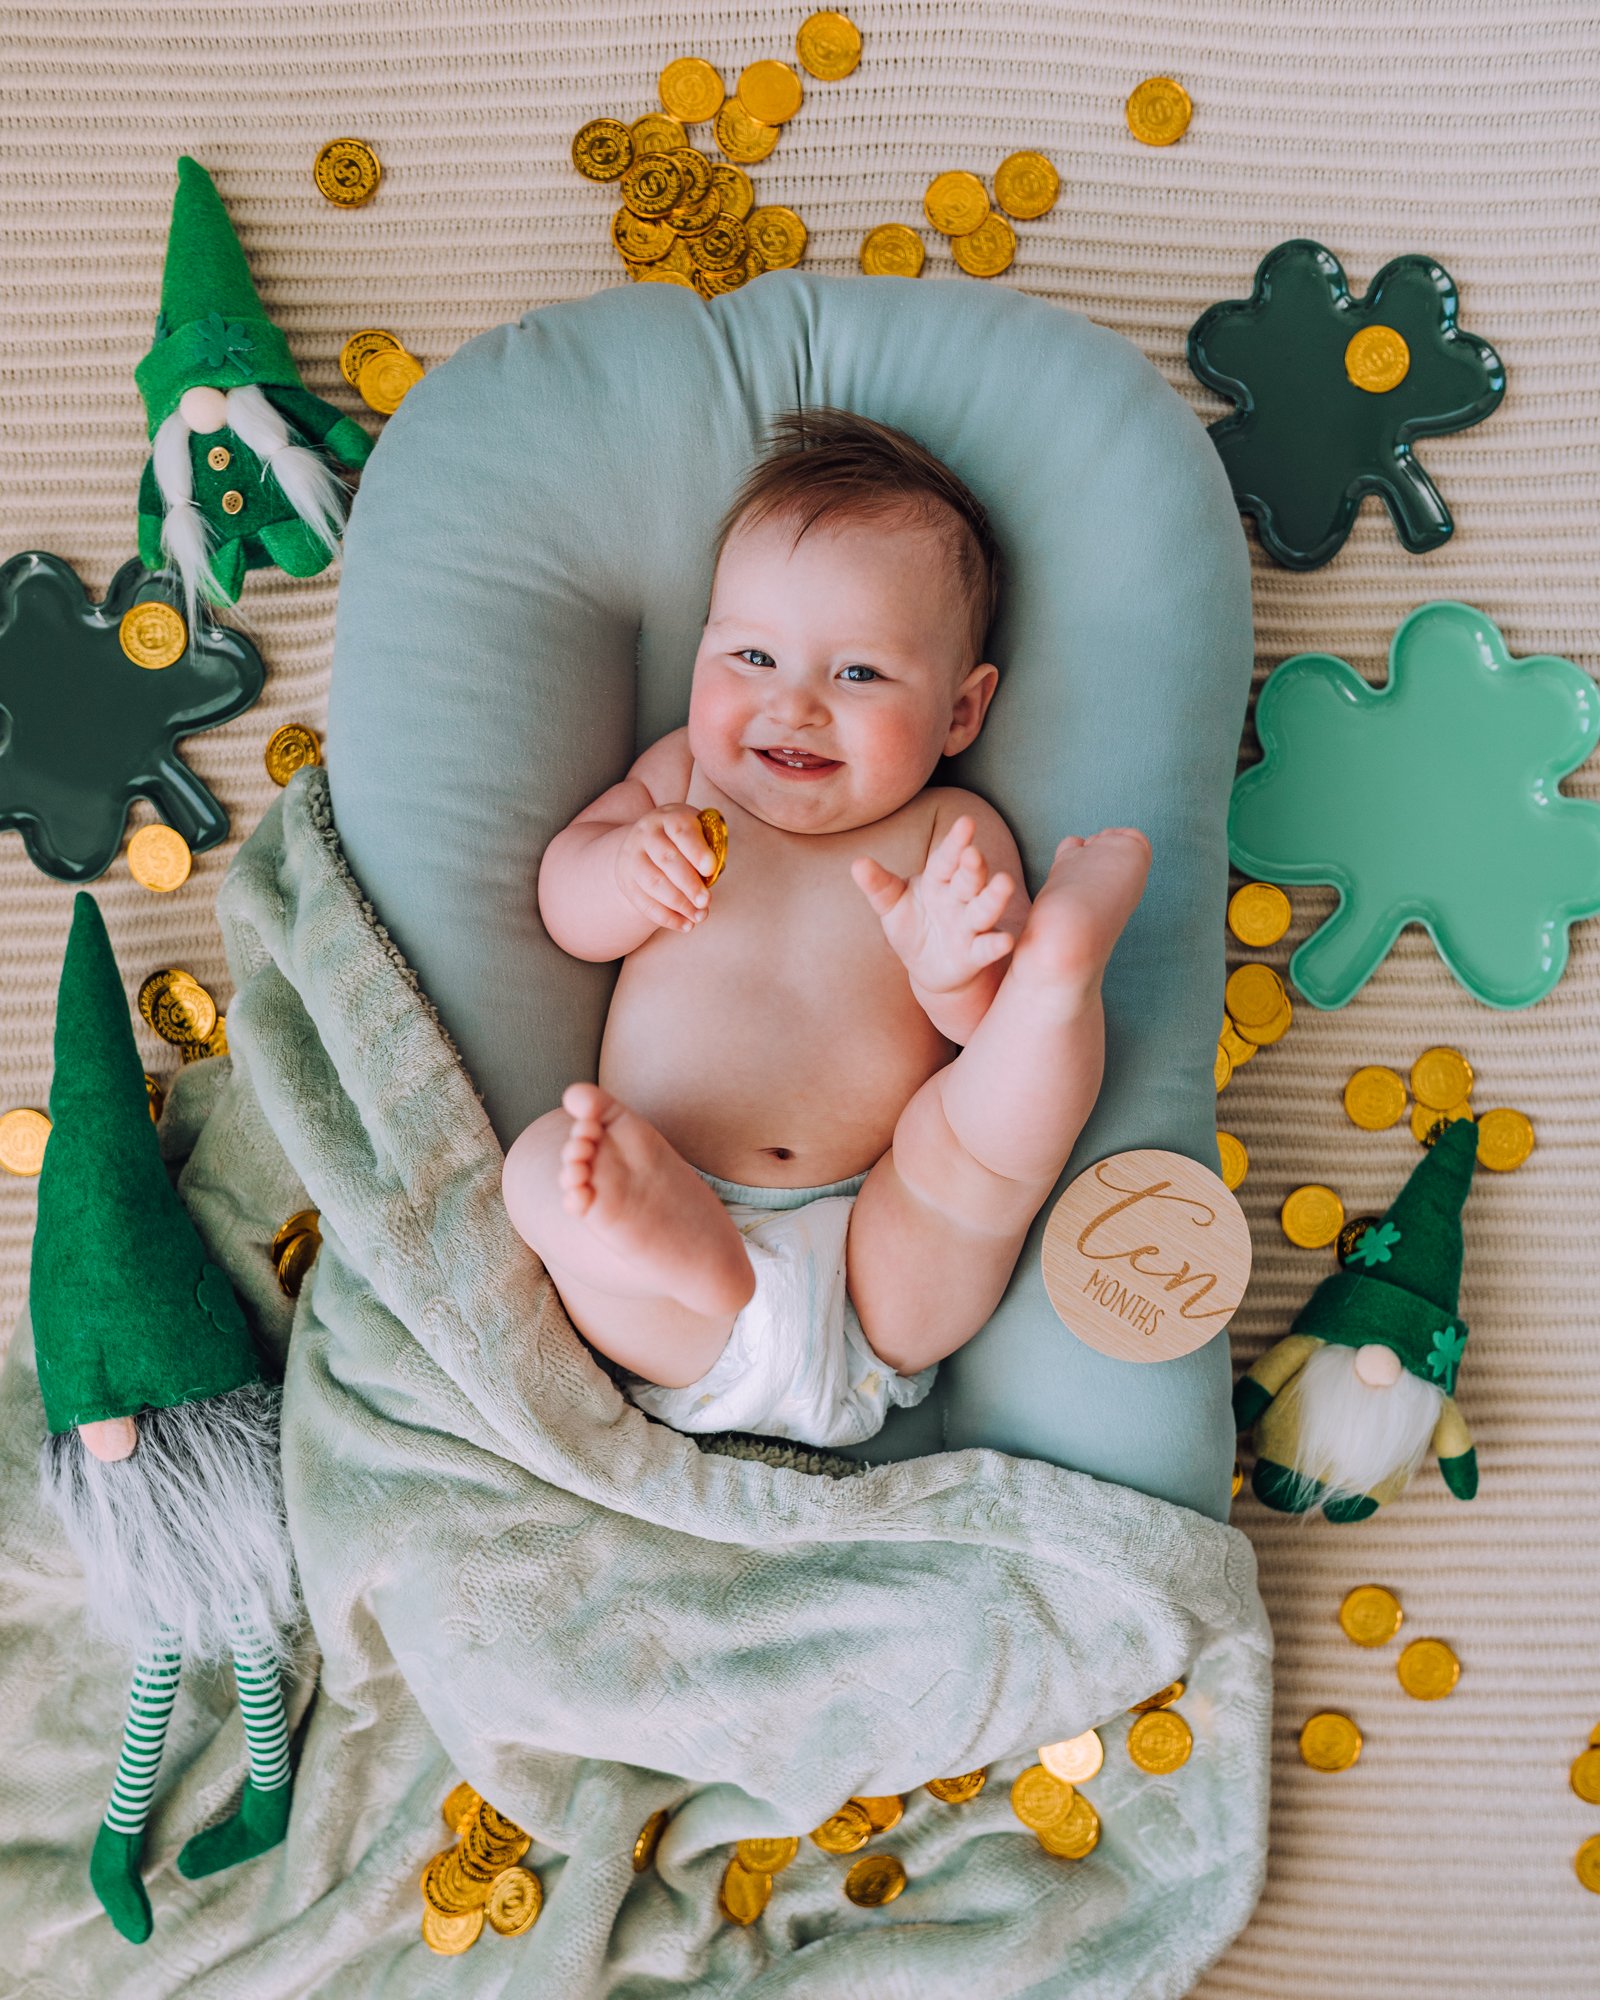 Spring Baby Photoshoot Ideas - St. Patrick's Day Flat Lay